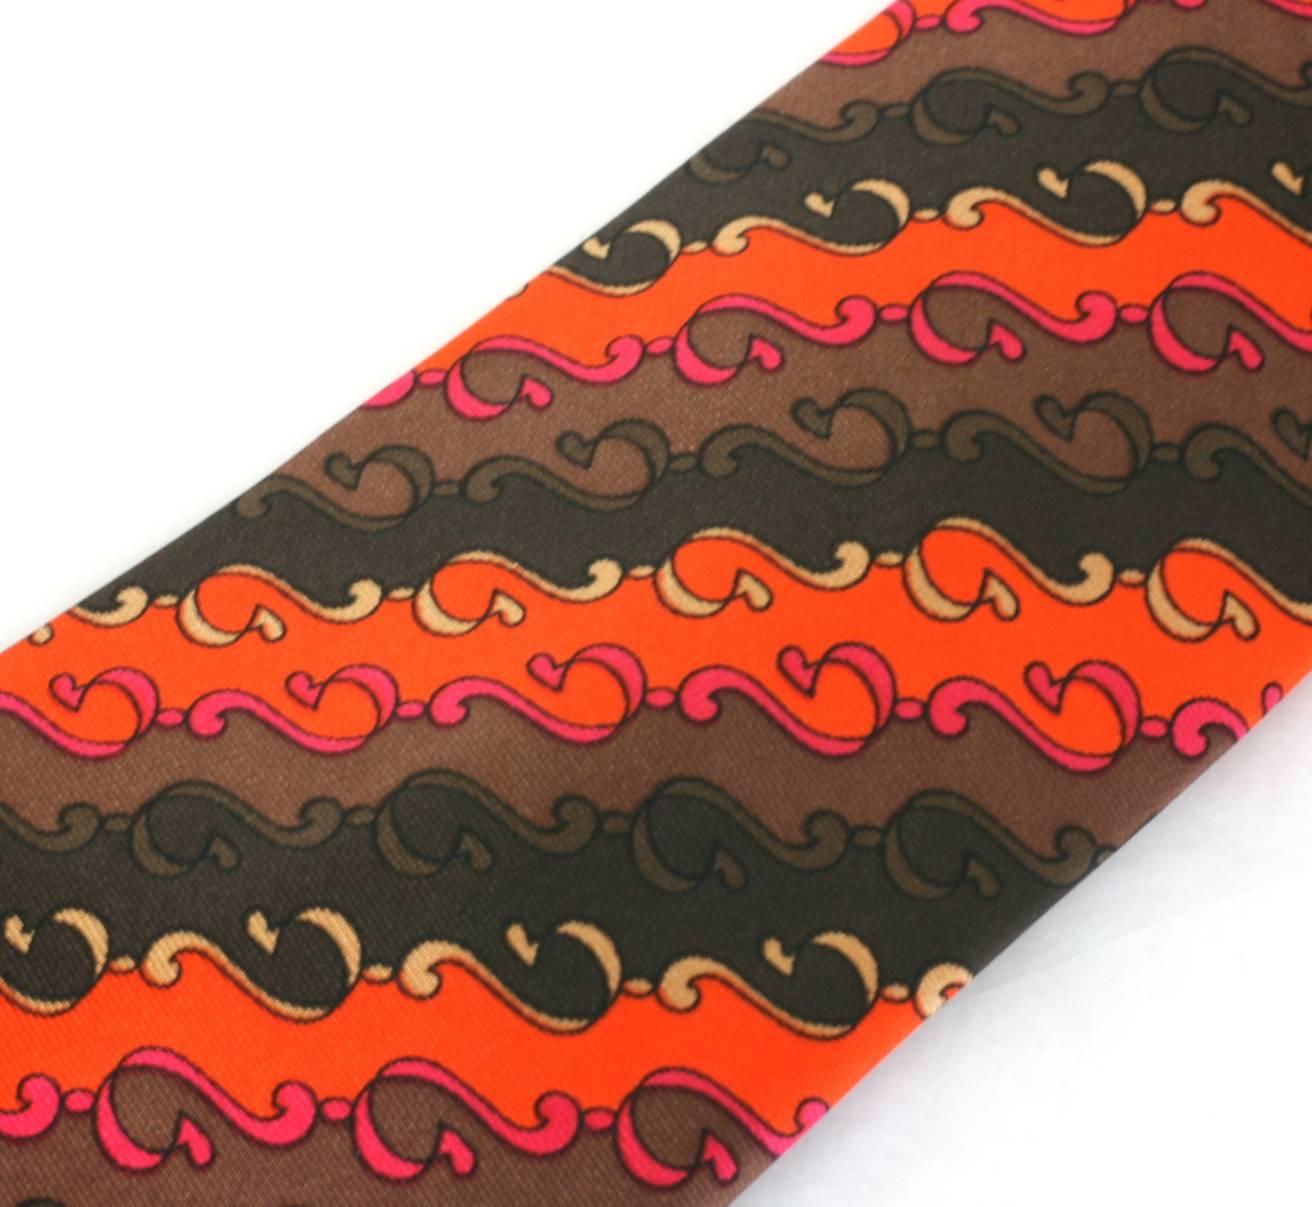 Pucci Orange and Brown Swirl Print Tie In New Condition For Sale In New York, NY